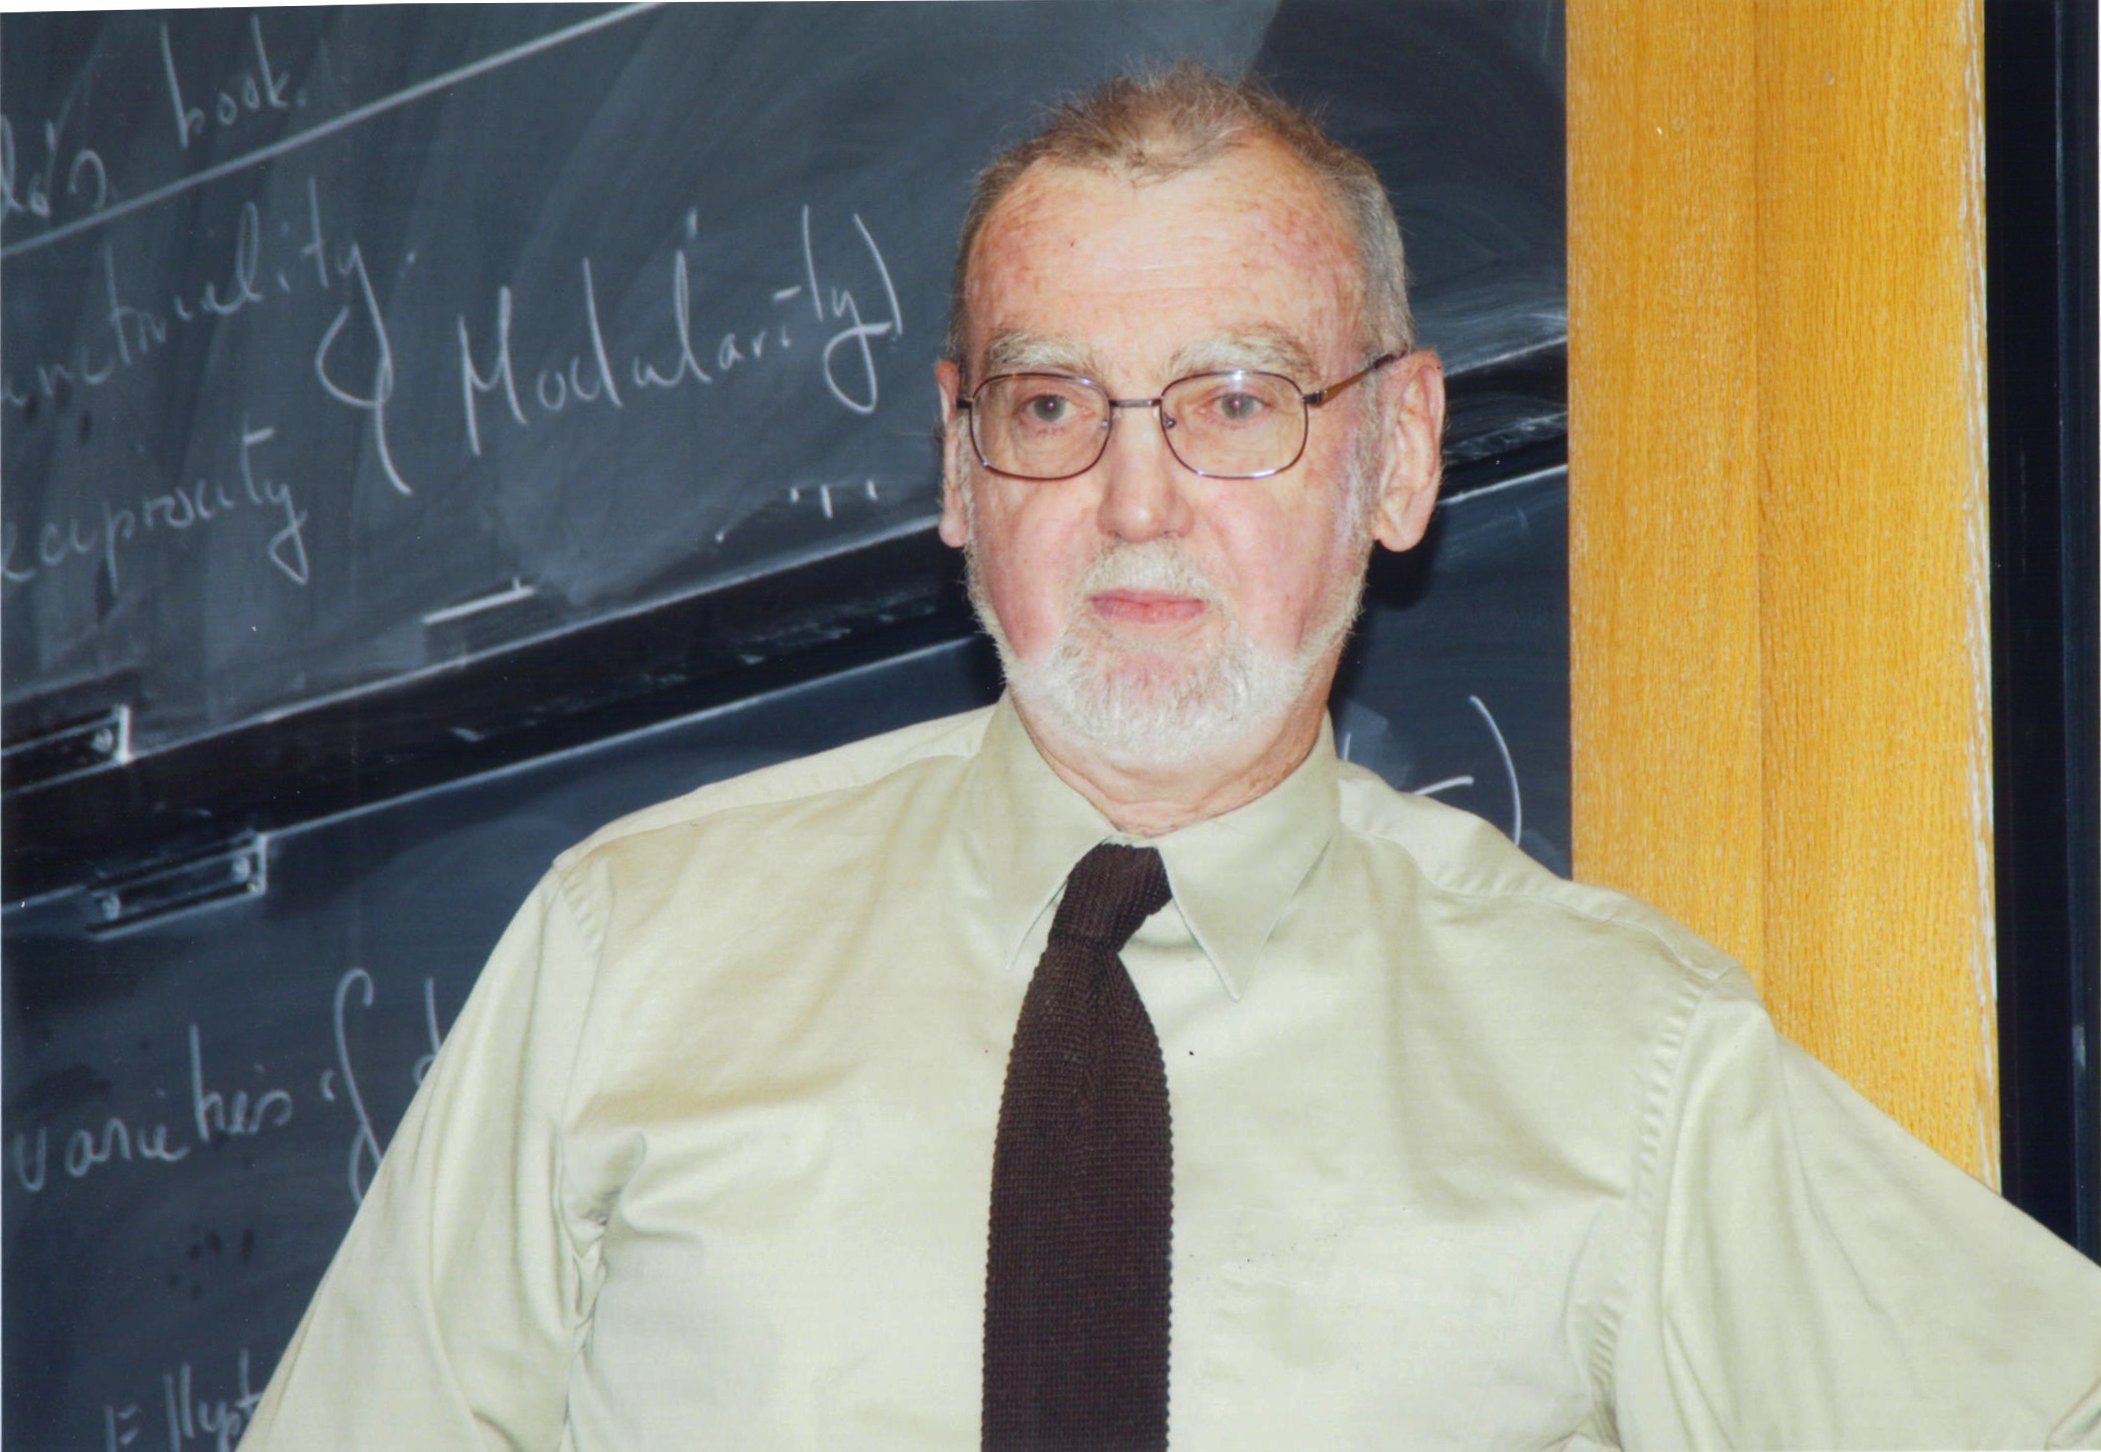 Photo of Prof. Robert Langlands (IAS, USA). Author:  Dr. Jeff Mozzochi (passed copyright for the photo to owner - professor Robert Phelan Langlands